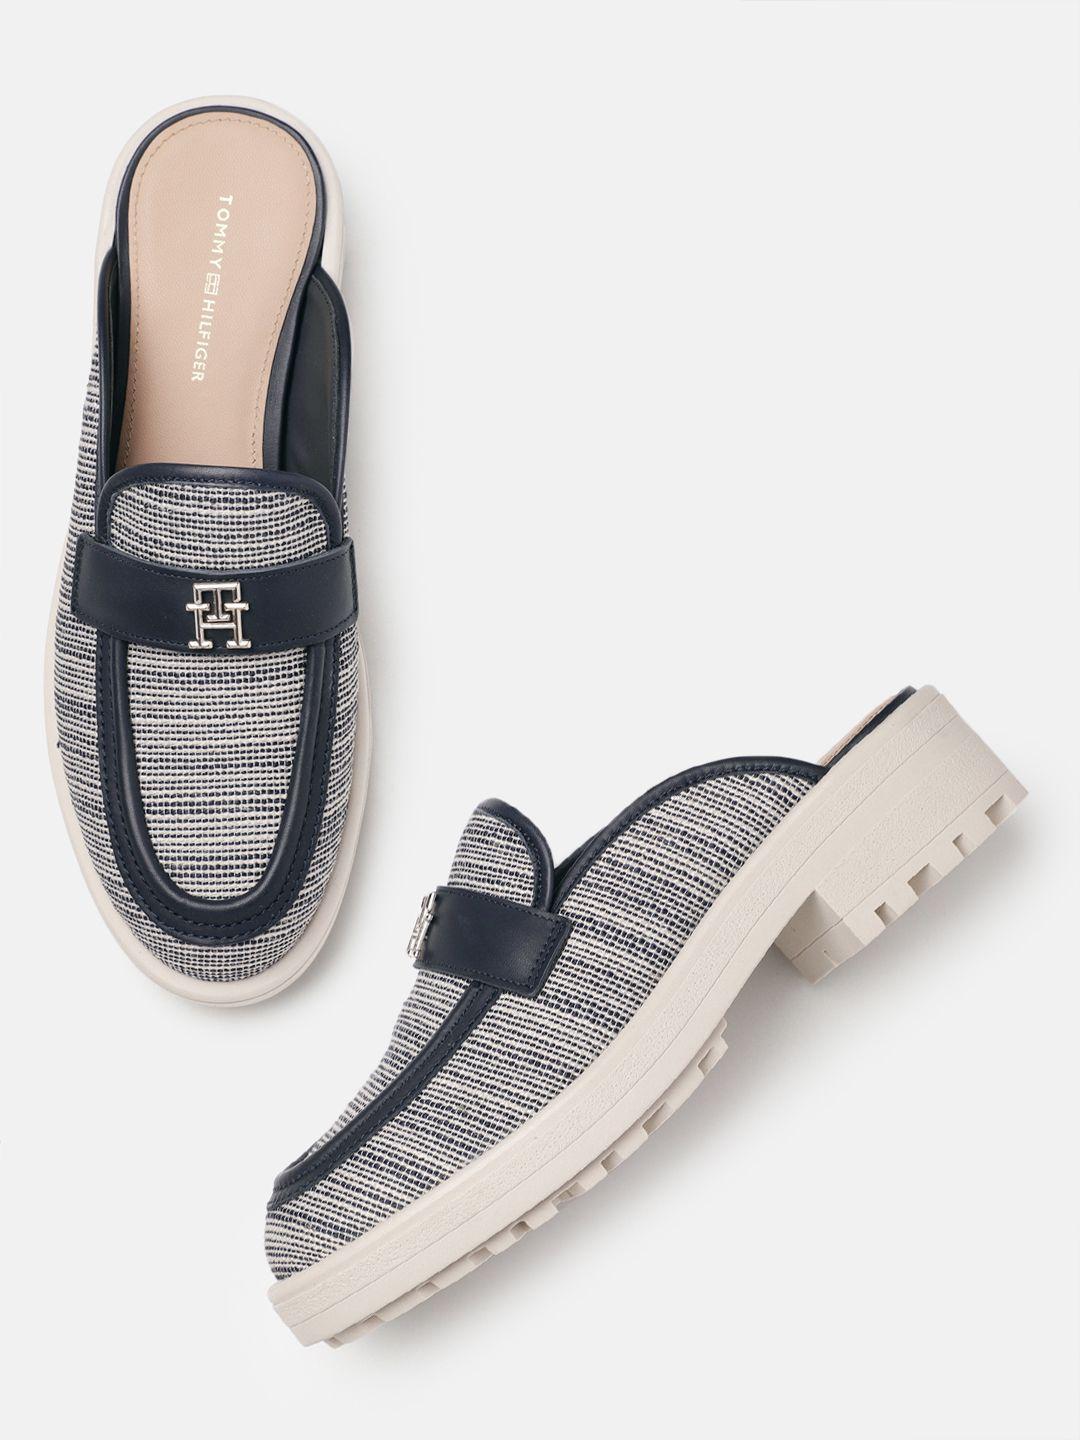 tommy hilfiger women woven textured block mules with brand logo buckle detail